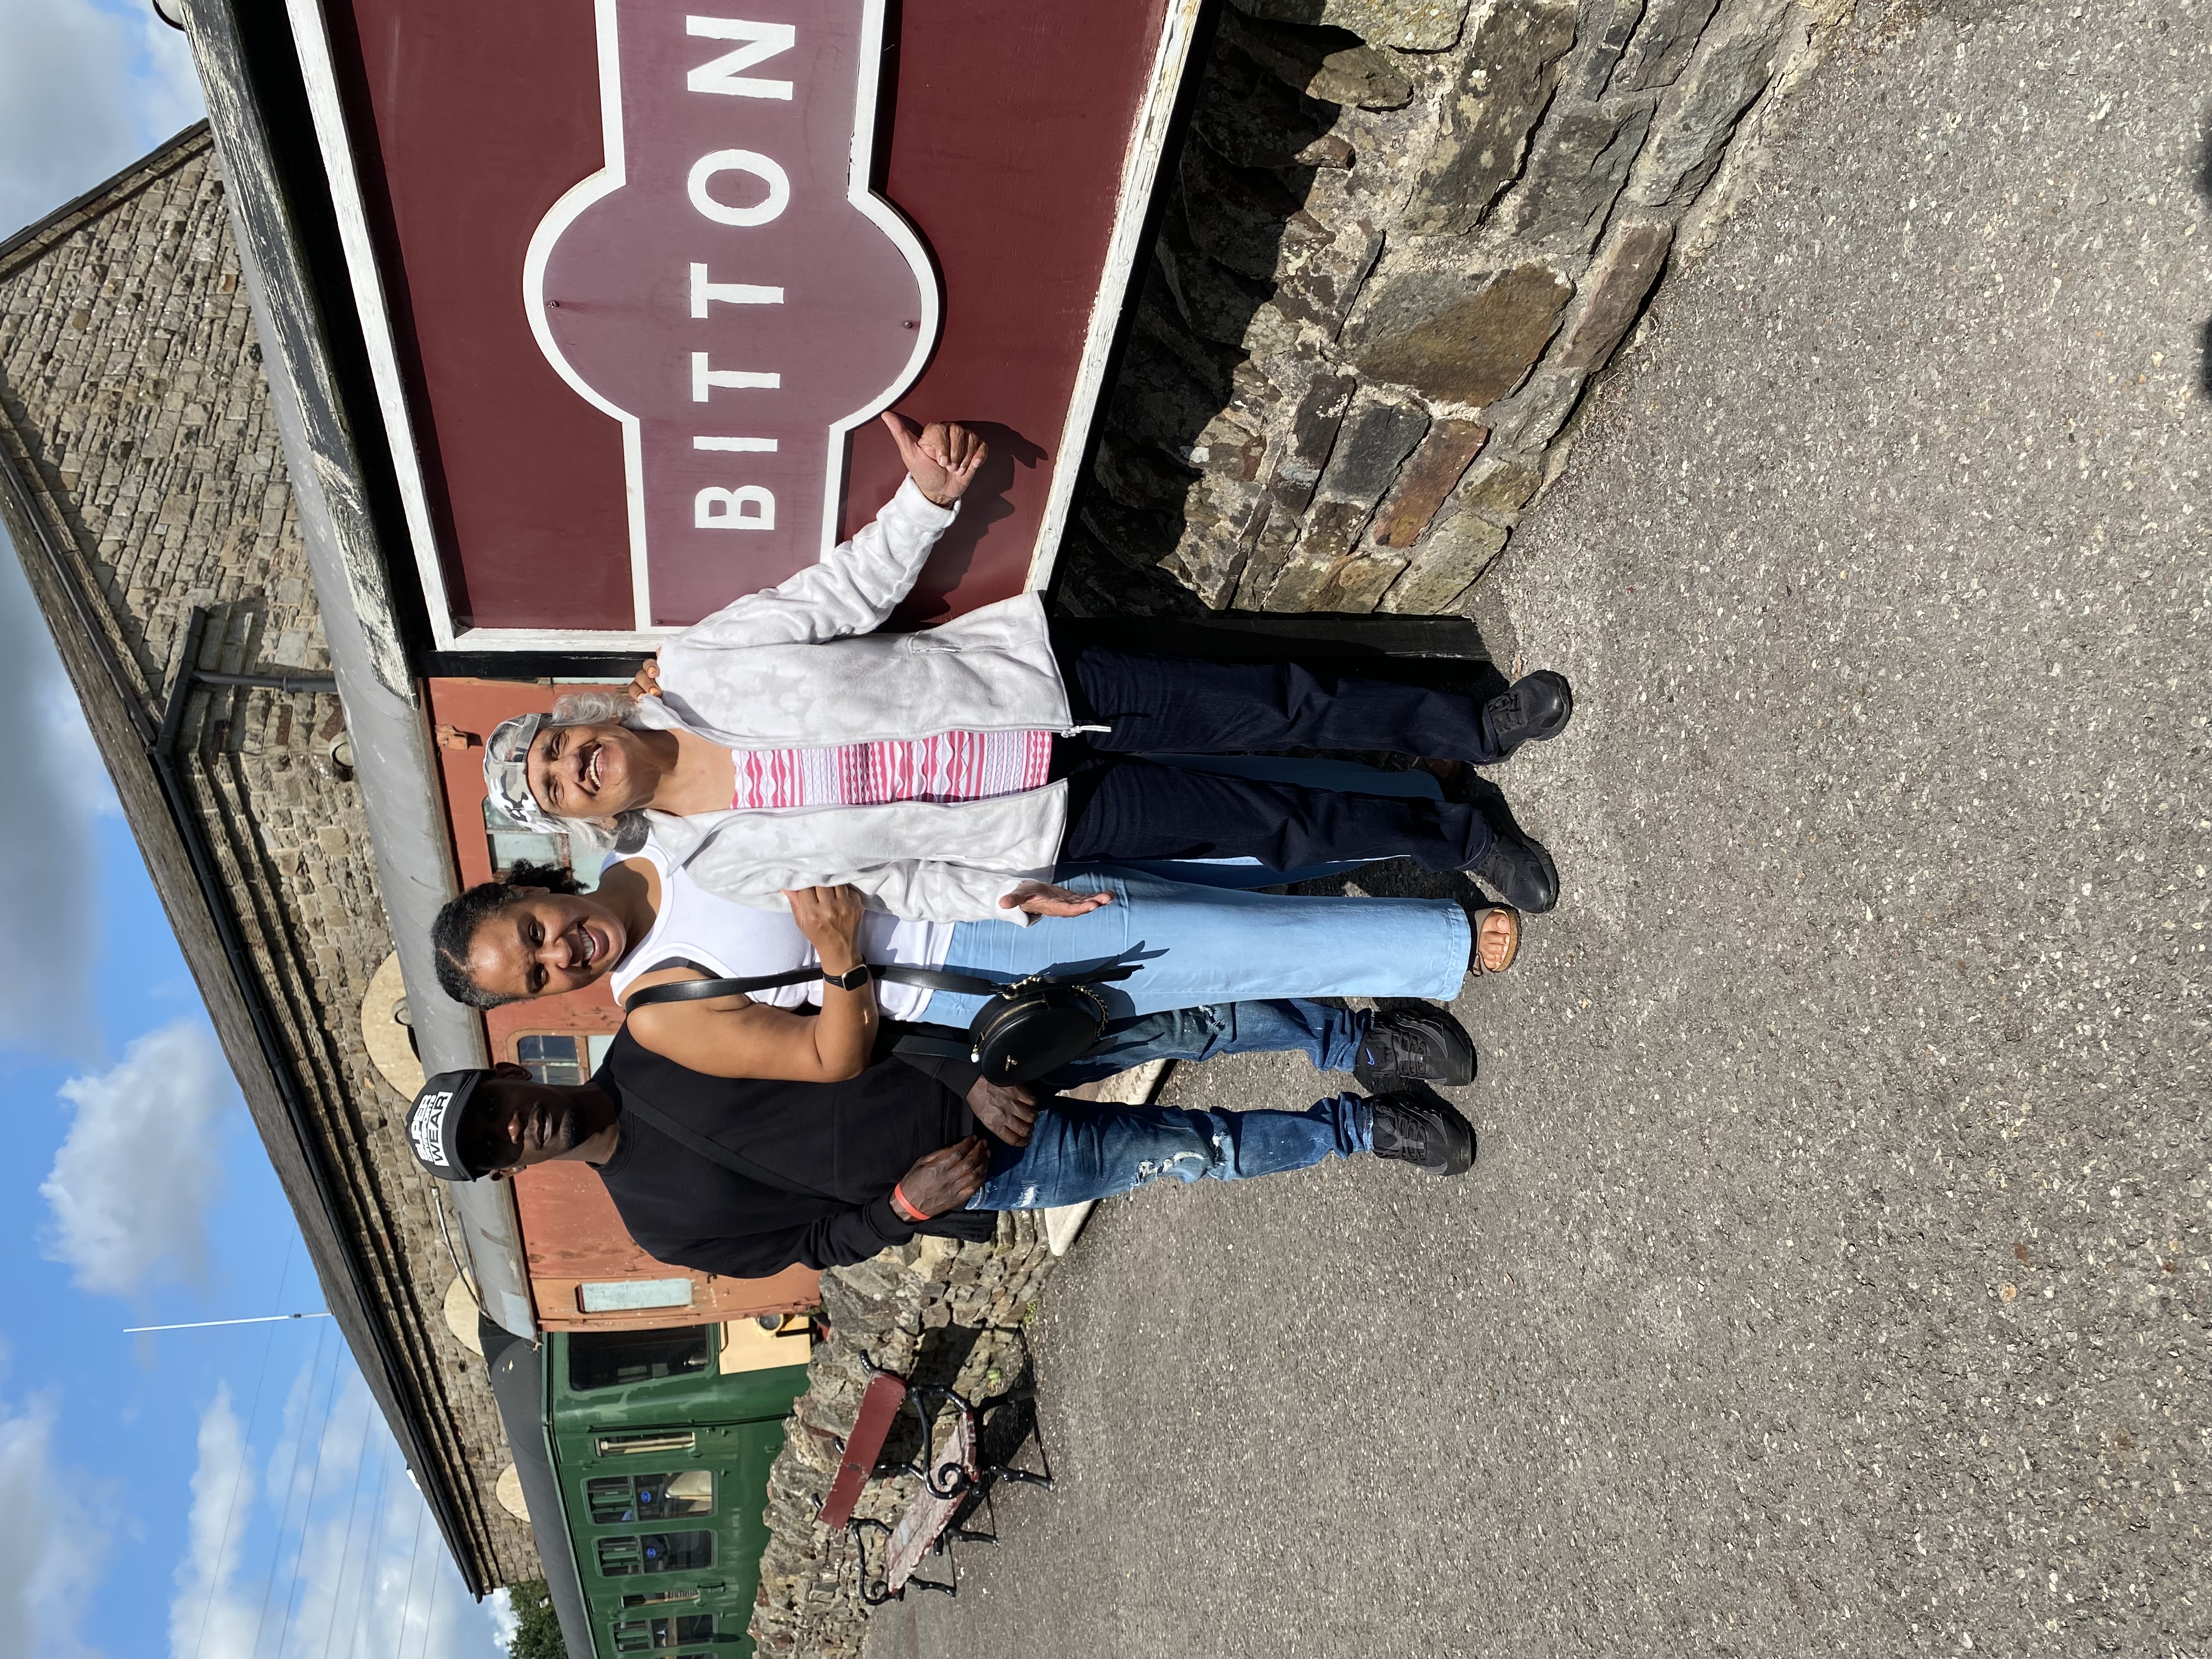 Naazina, Loudette and Chris at Bitton Railway